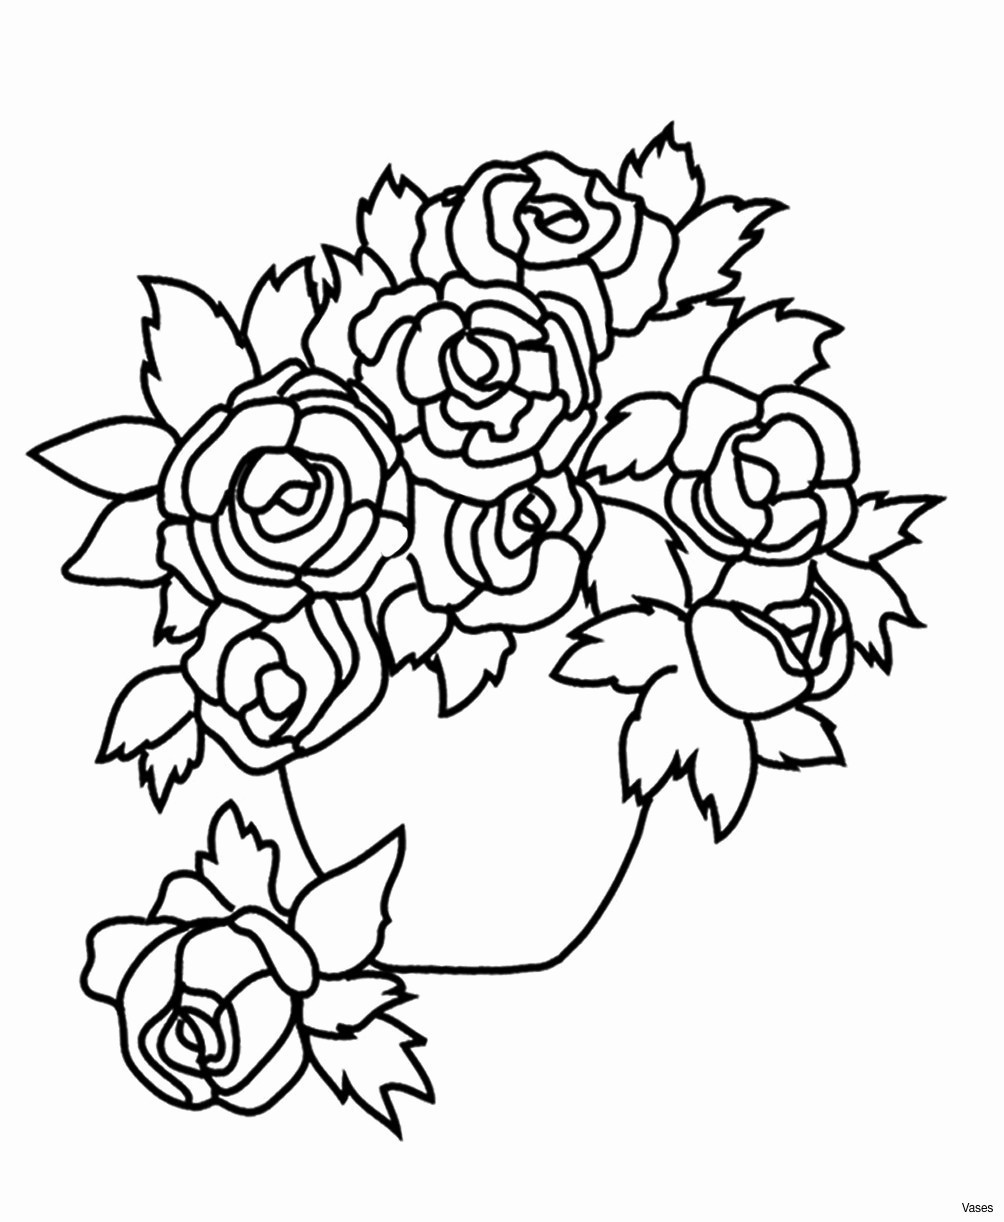 30 Lovable Teddy Bear Vase 2024 free download teddy bear vase of unique rose coloring pages 31262 coloring pages in rose coloring pages fresh vases flowers in vase coloring pages a flower top i 0d flowers